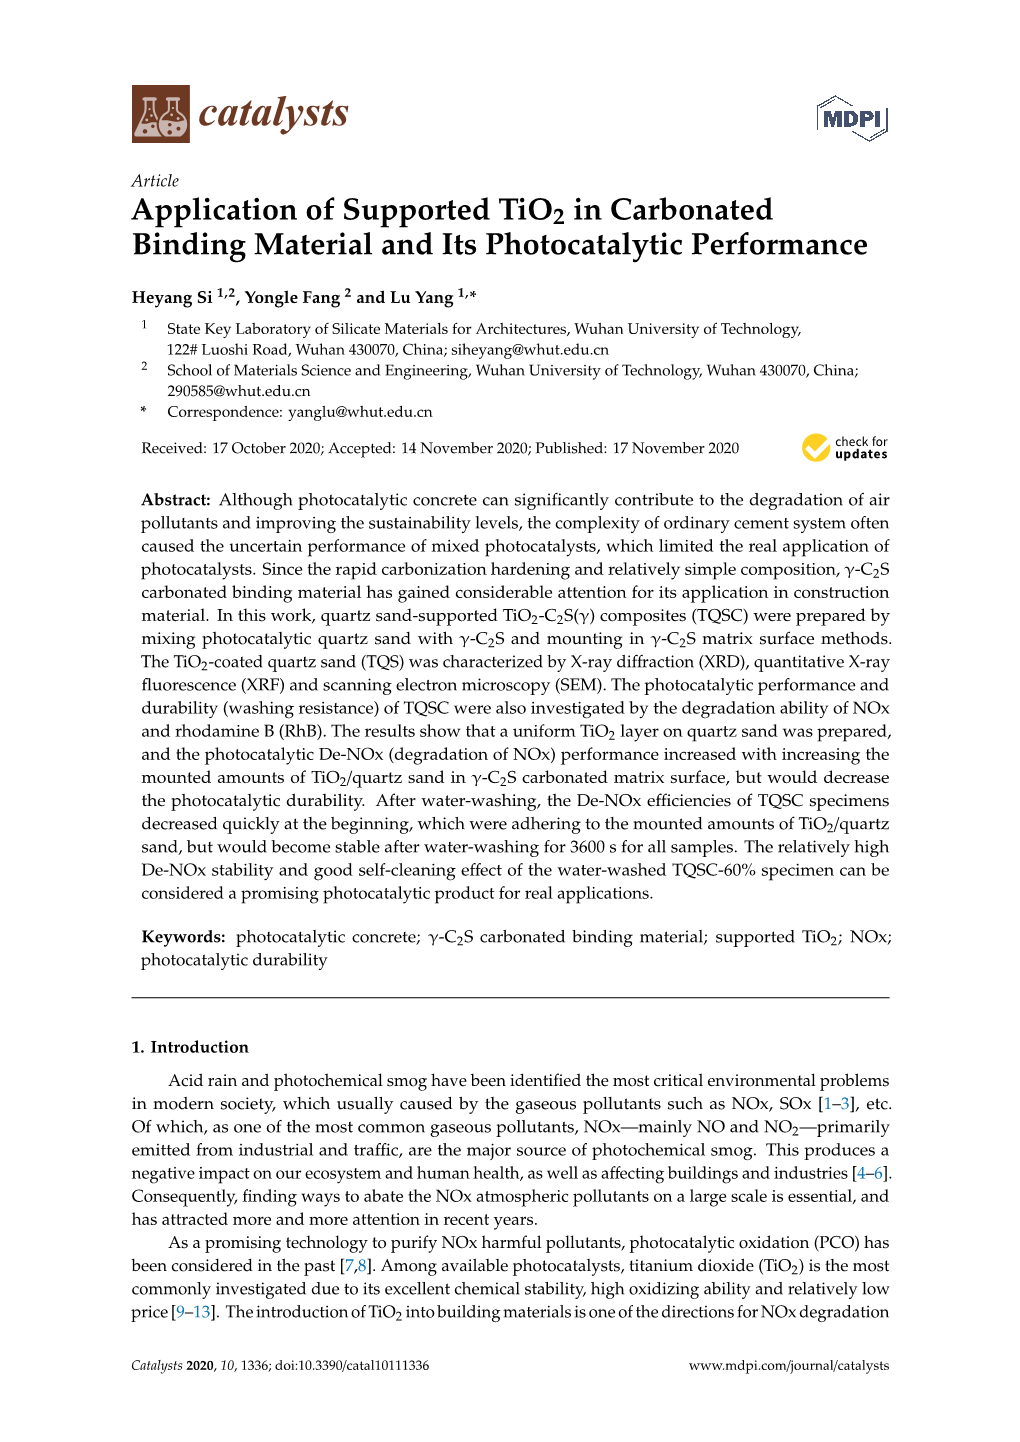 Application of Supported Tio2 in Carbonated Binding Material and Its Photocatalytic Performance